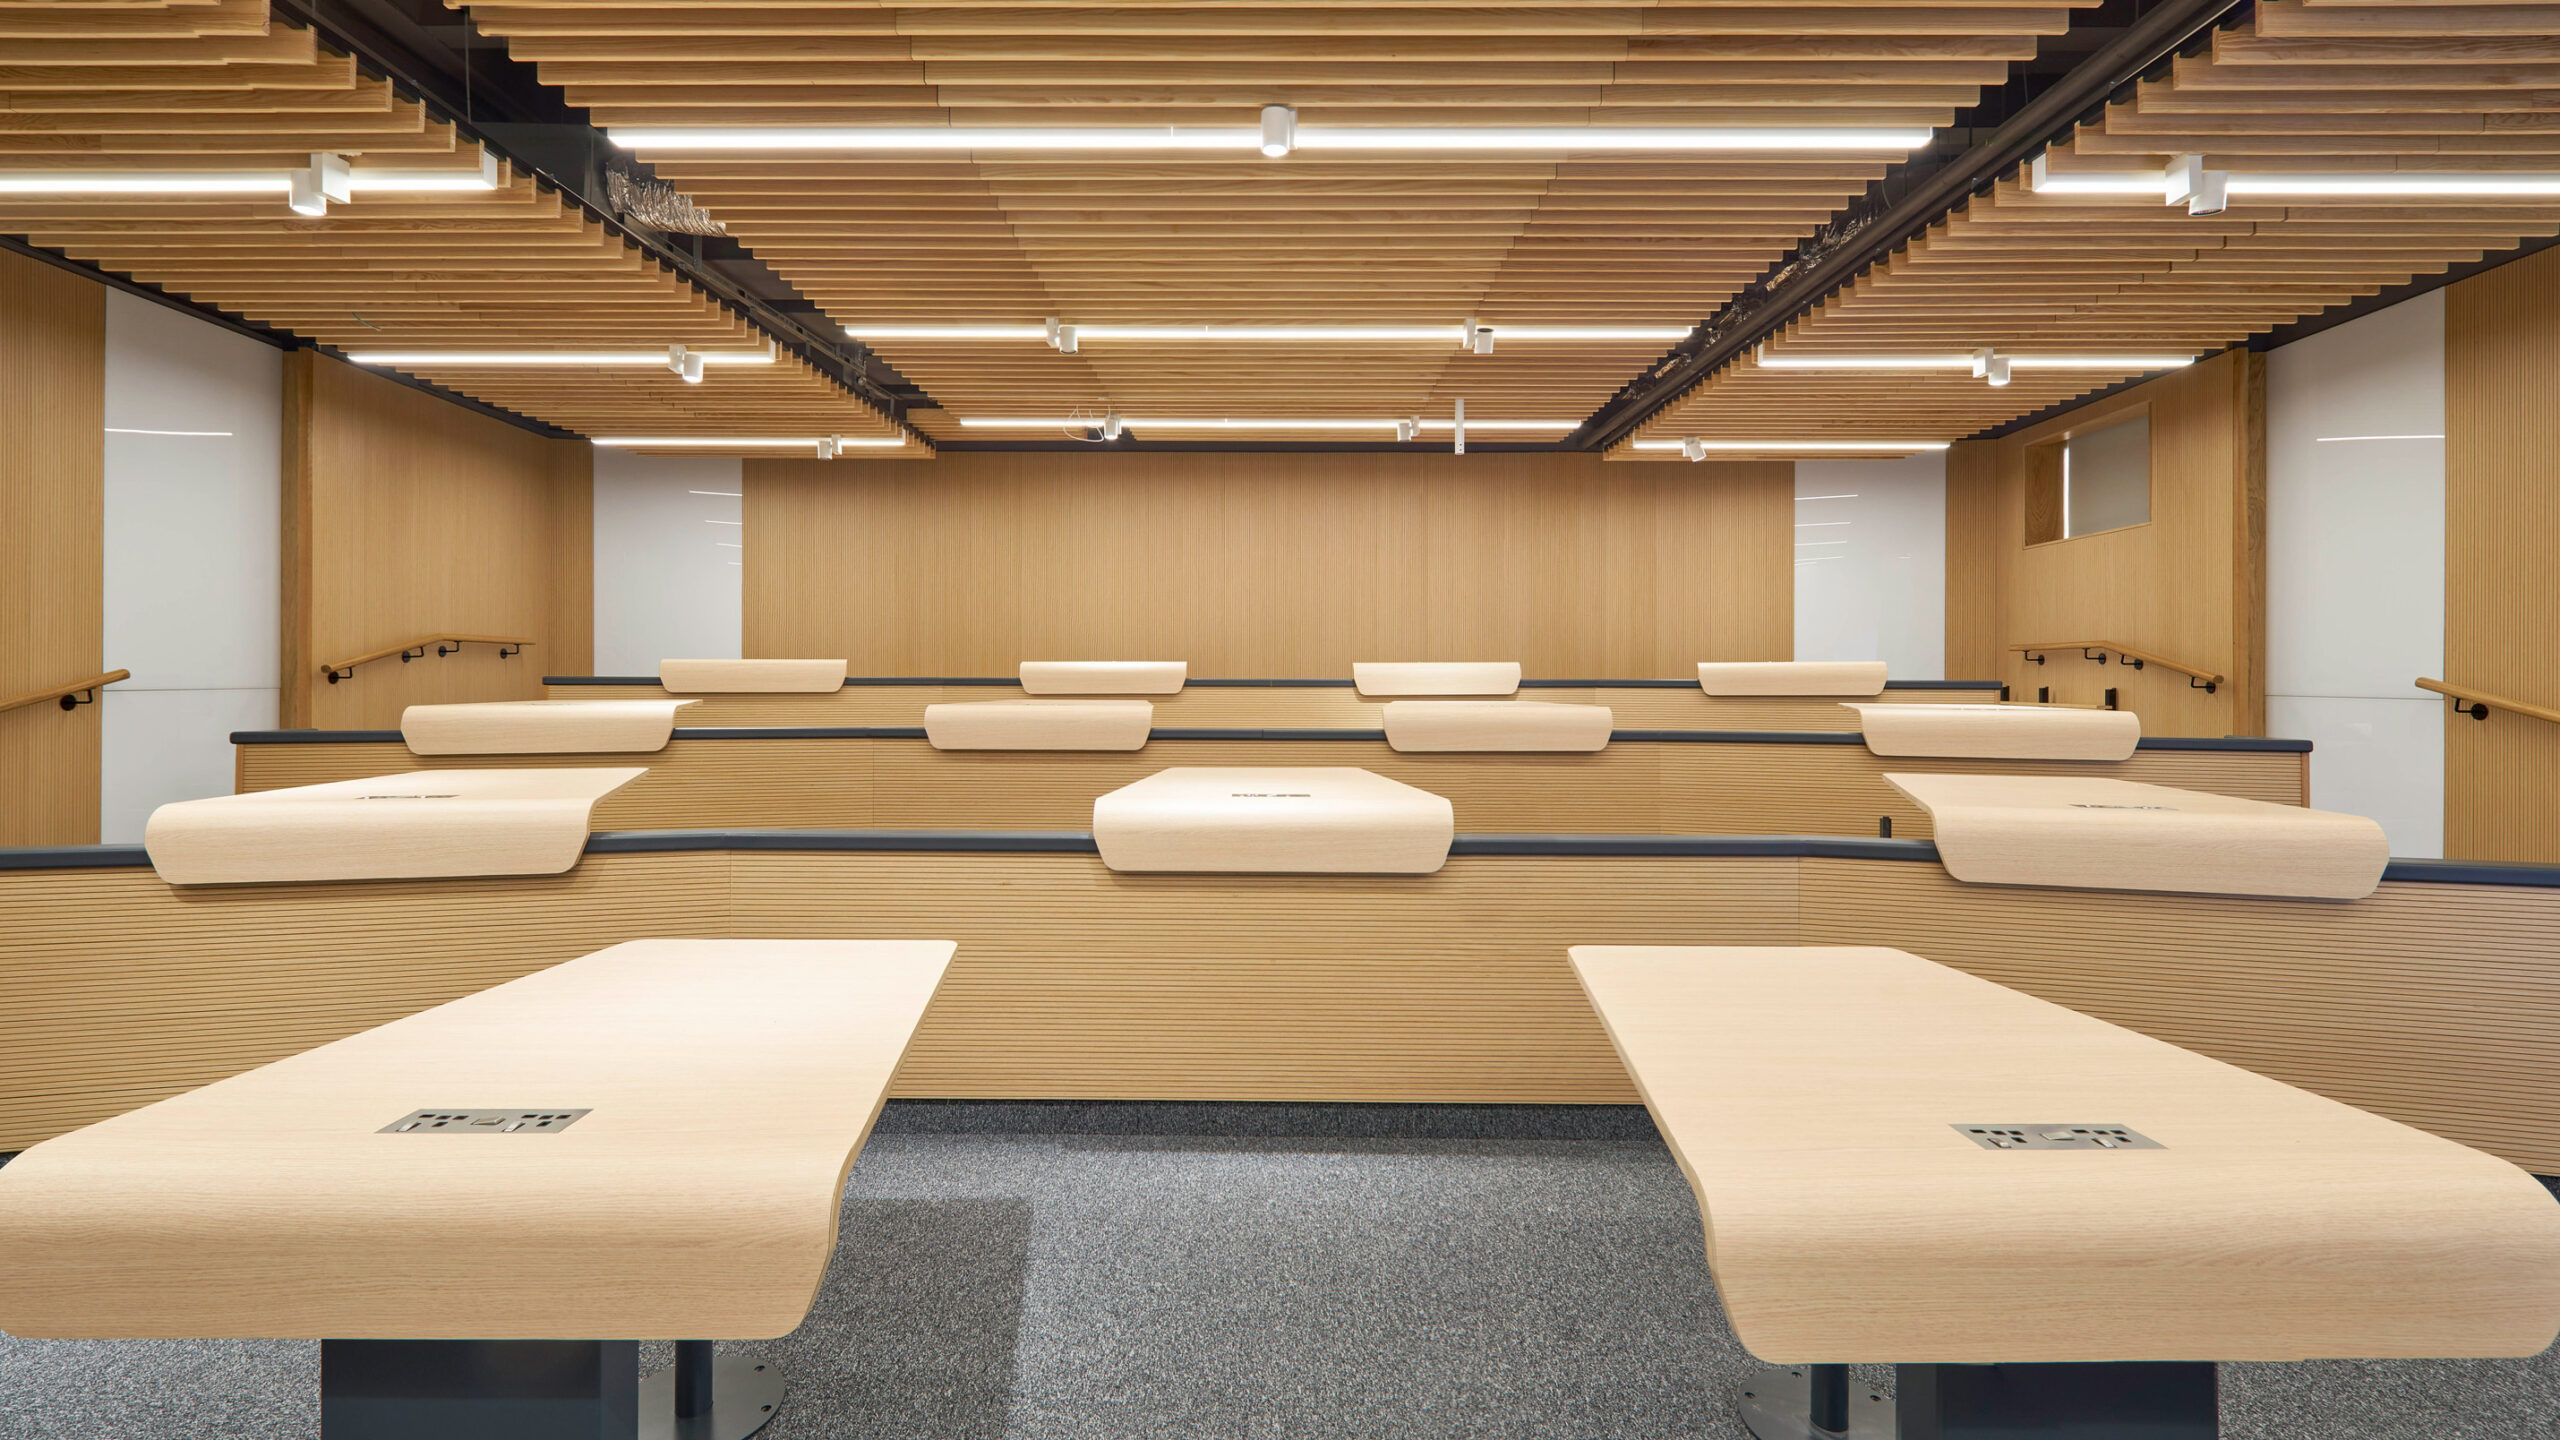 Photograph of lecture theatre for collaborative learning